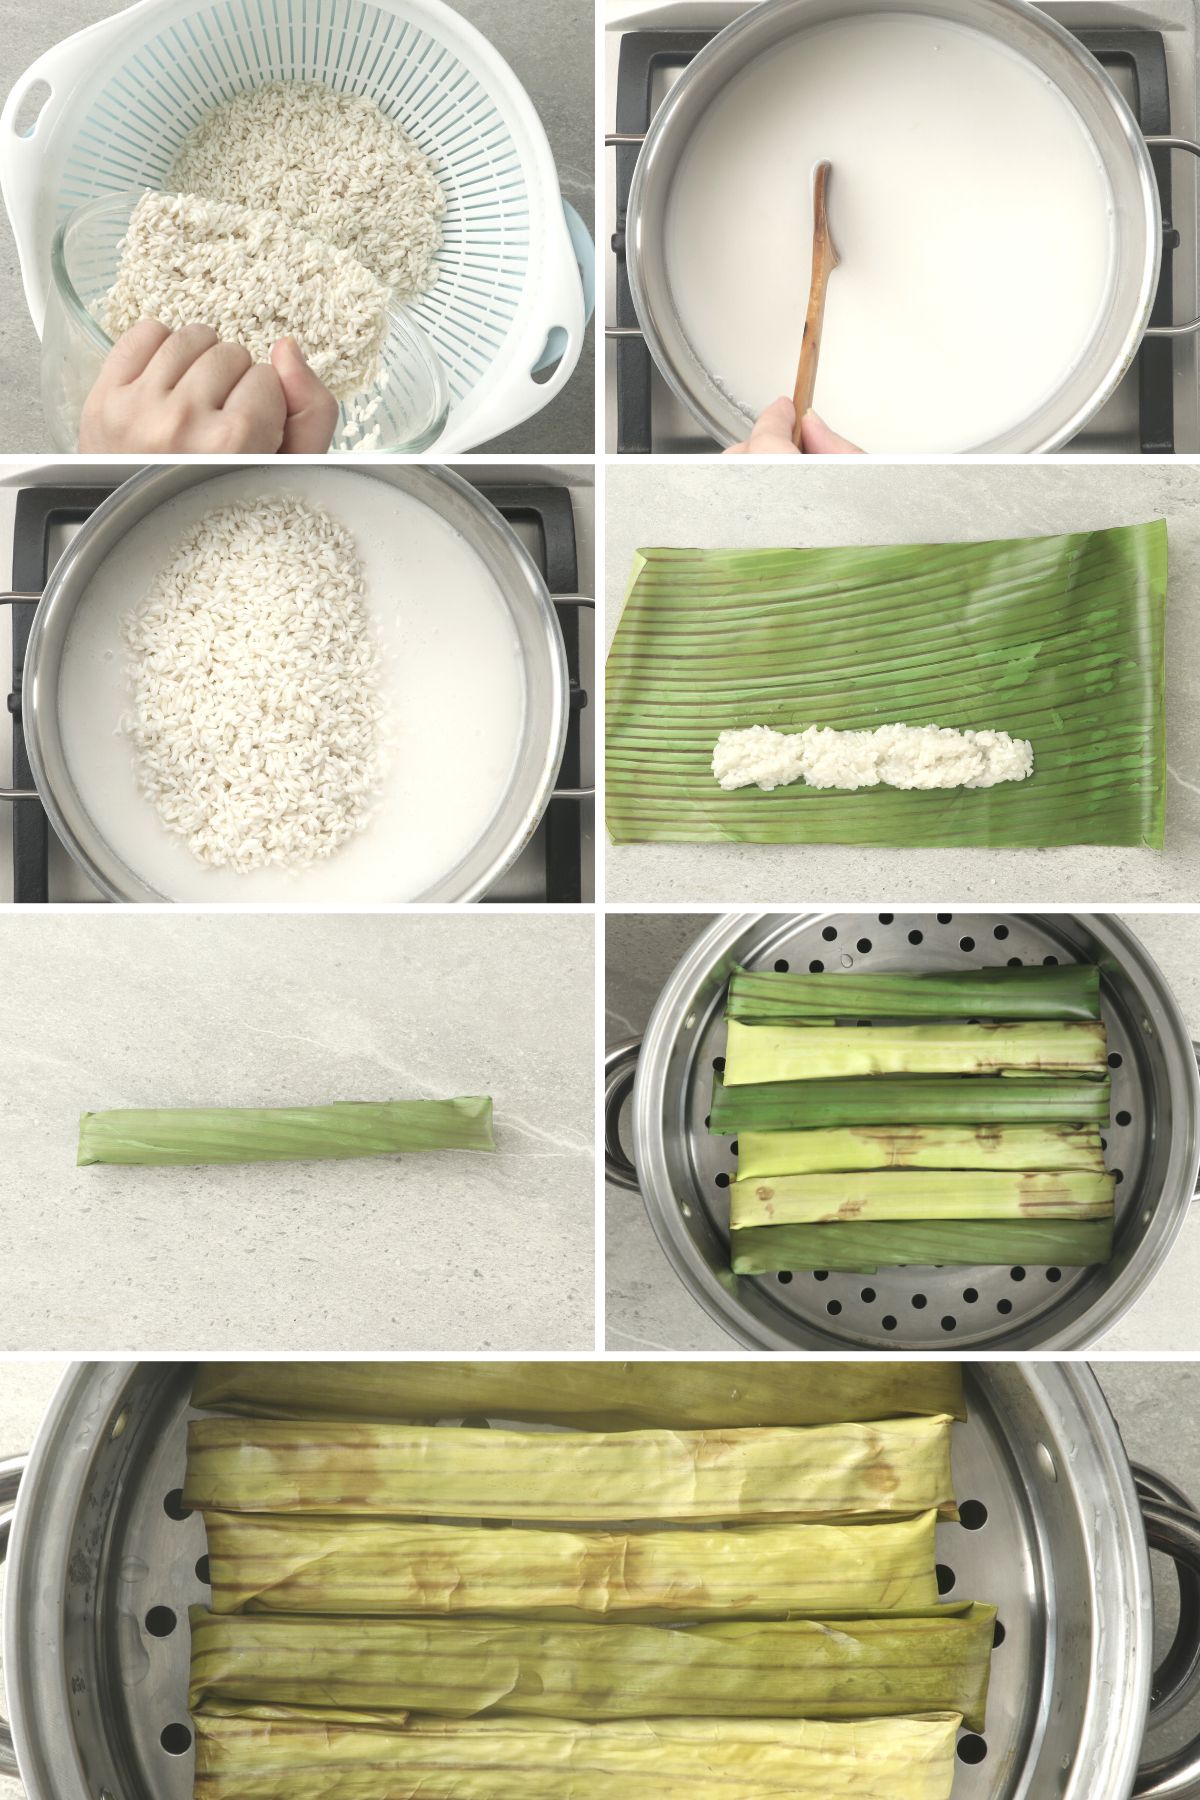 Steps on how to cook Suman Malagkit.